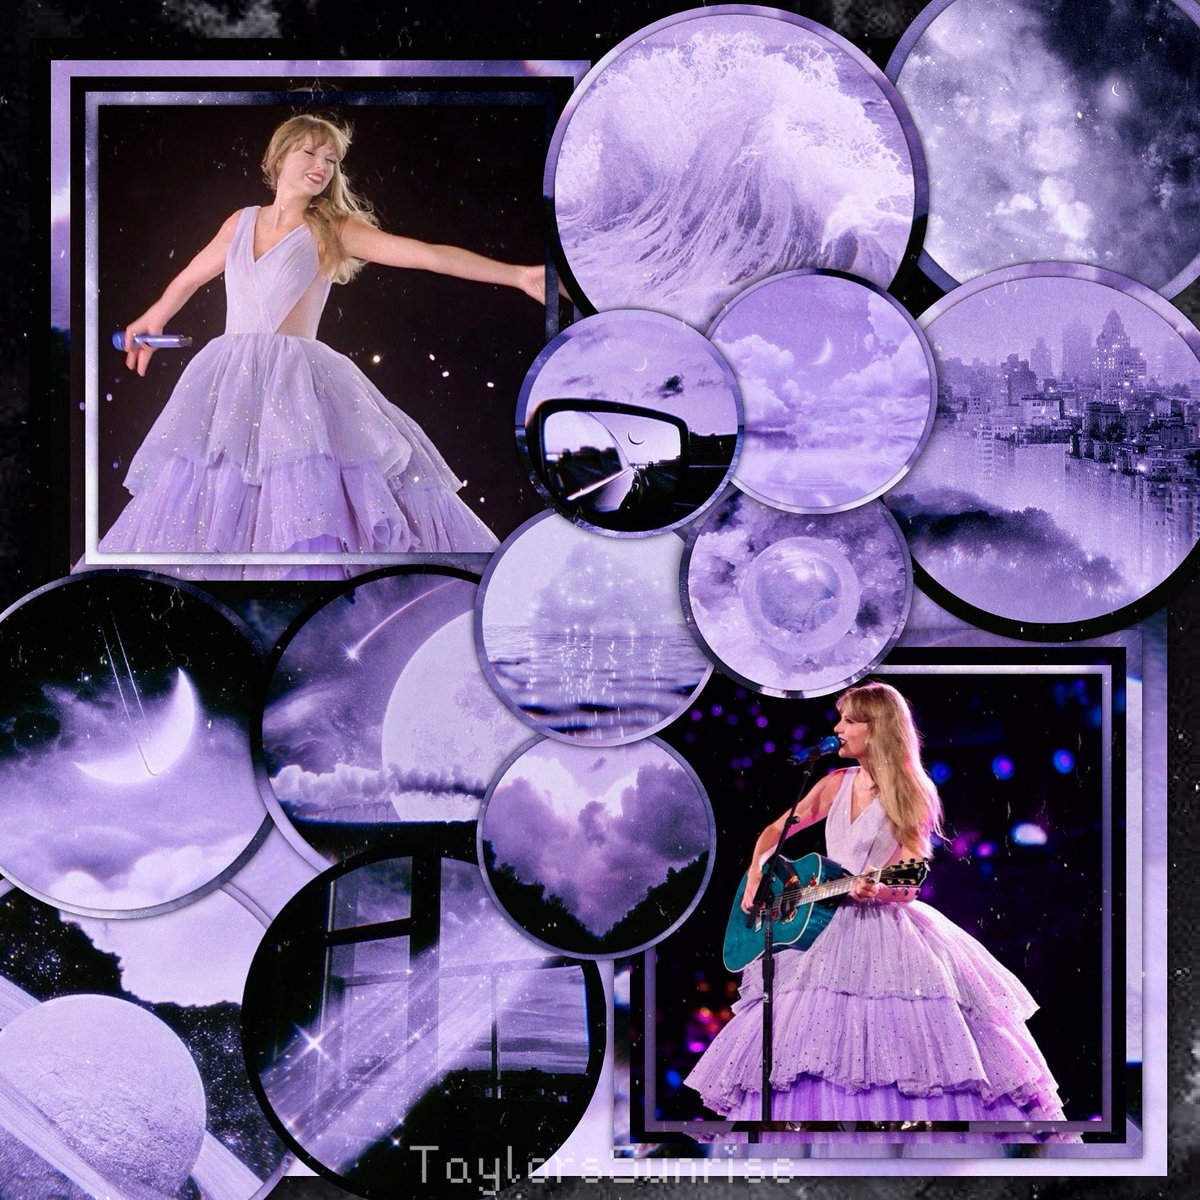 I’m posting this here because it flopped on Instagram lol, anyways have a Taylor edit
•
•
•
#taylorswift #taylorswiftedit #taylorswiftedits #tayloralisonswift #tayloredit #tayloredits #photoedit #photoedits #photoediting #photoeditor #edit #edits #editing #editor